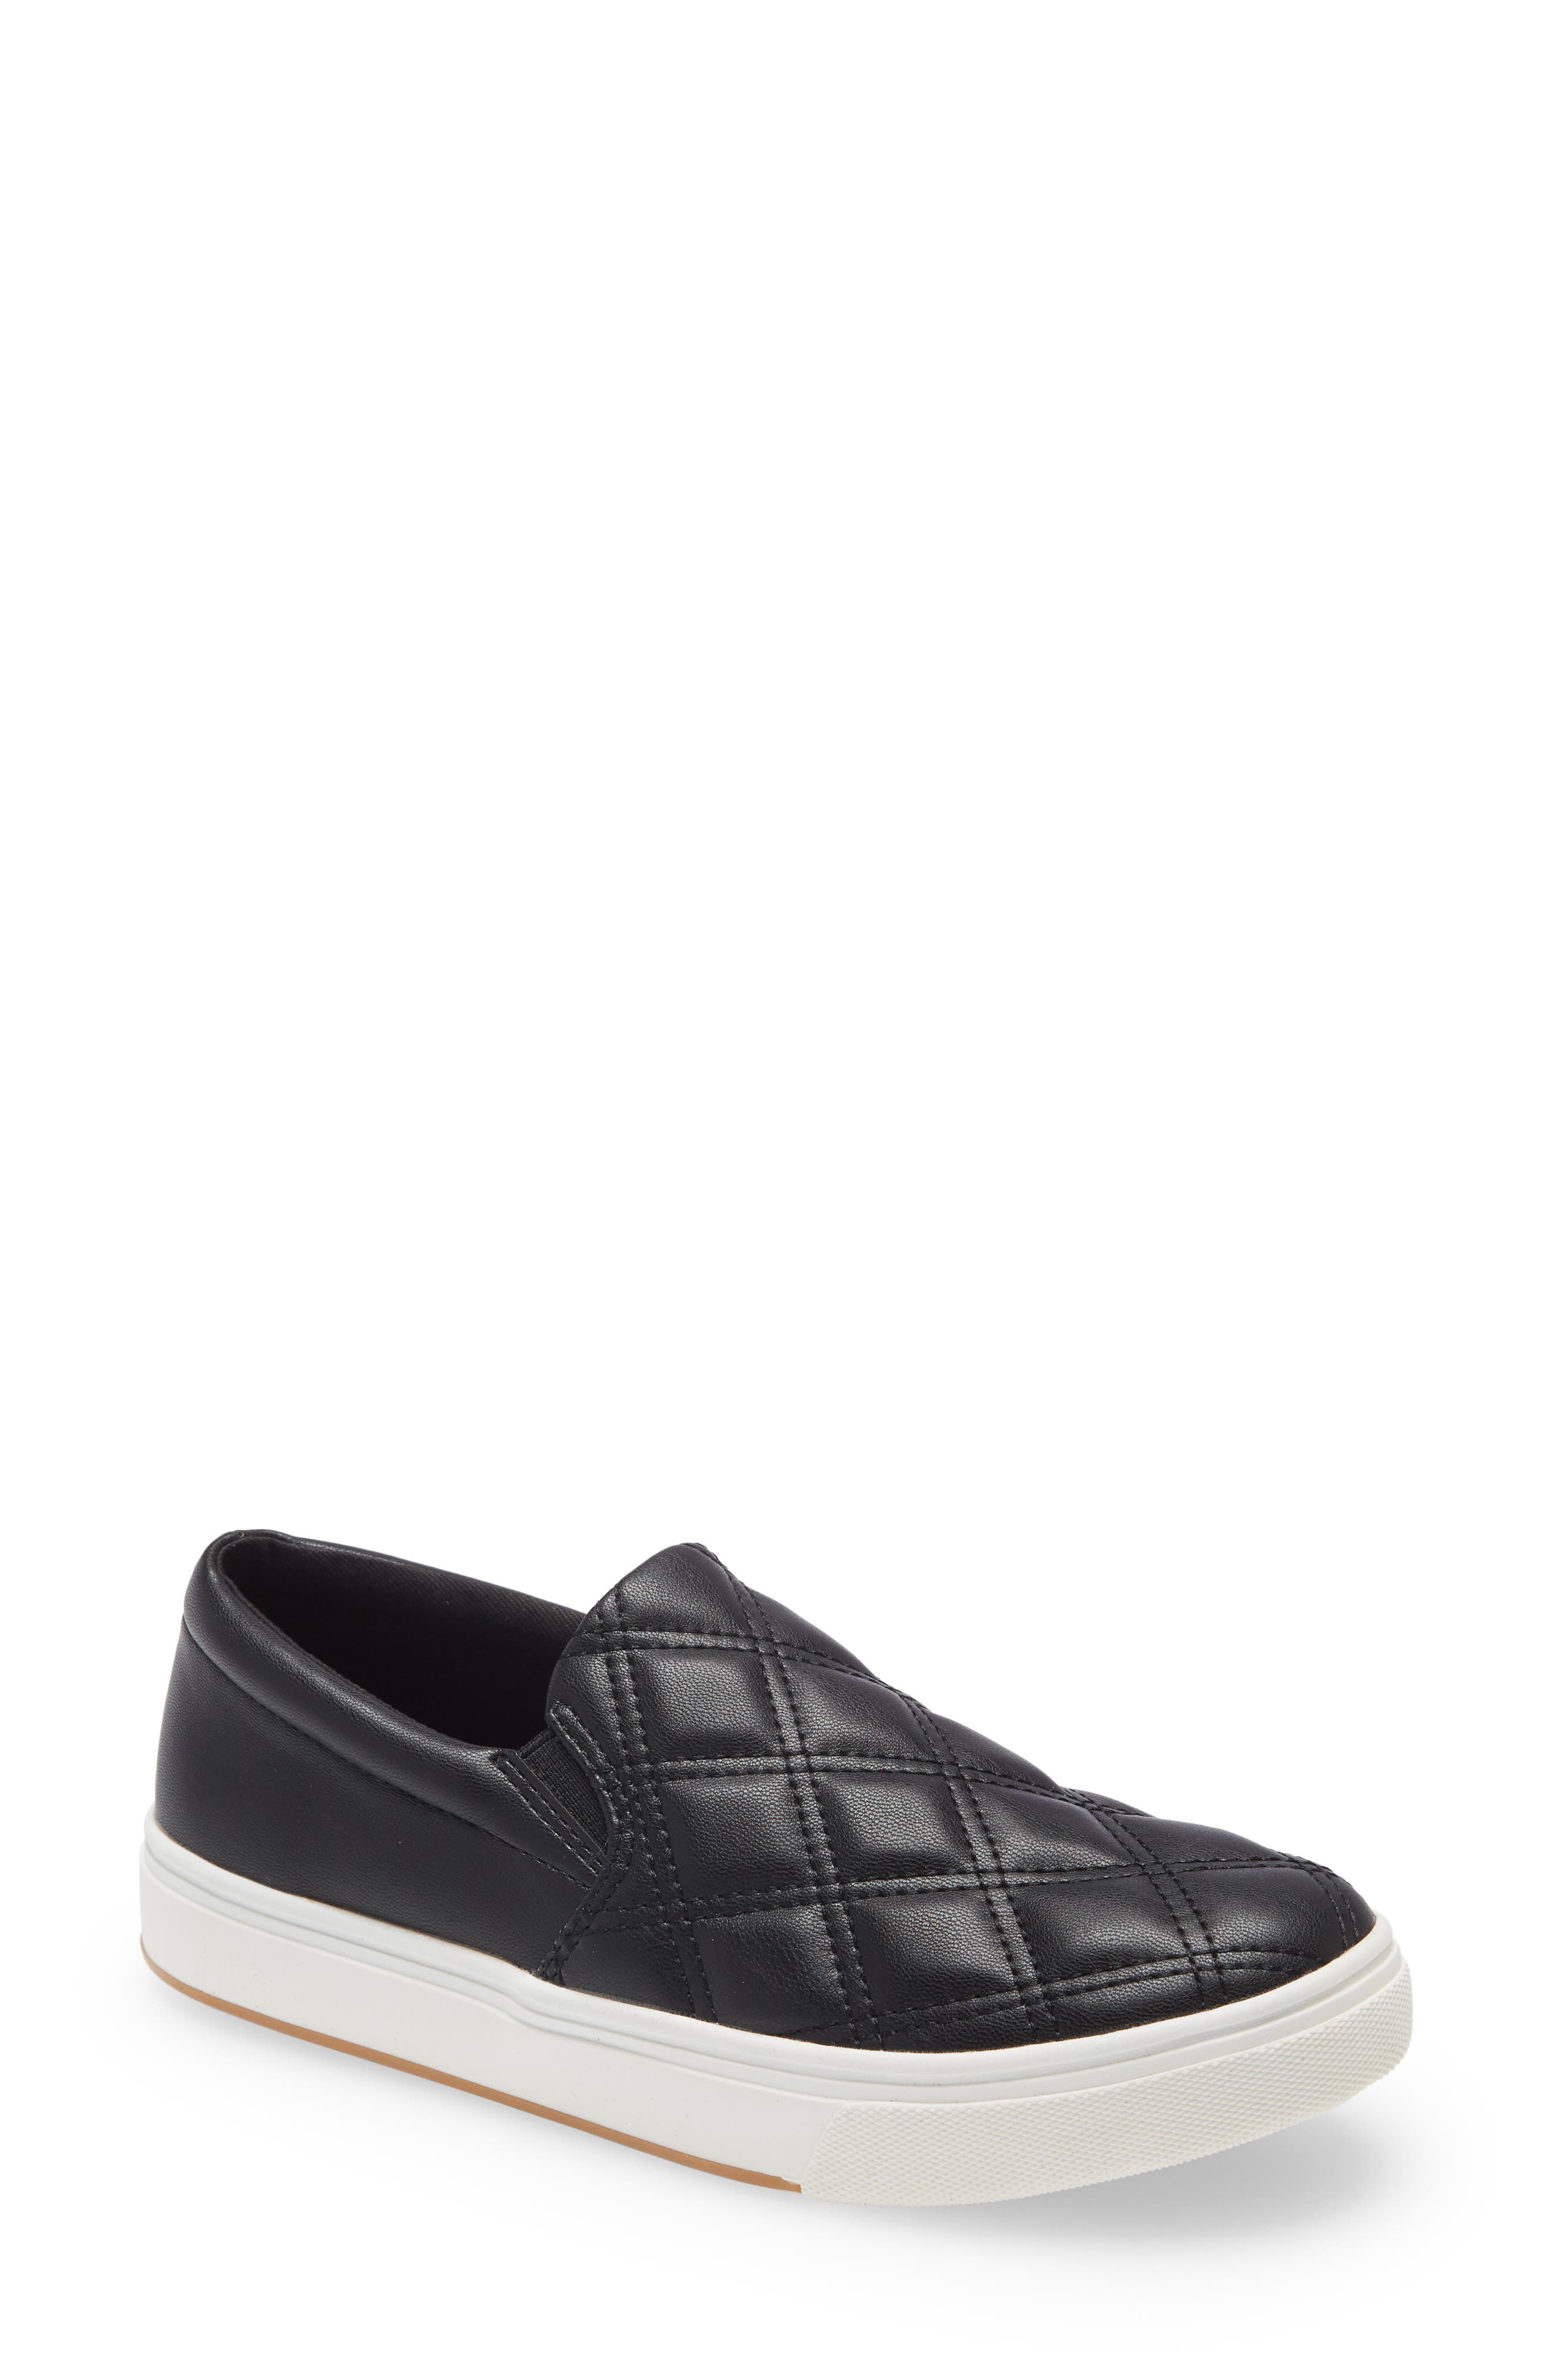 steve madden black quilted sneakers